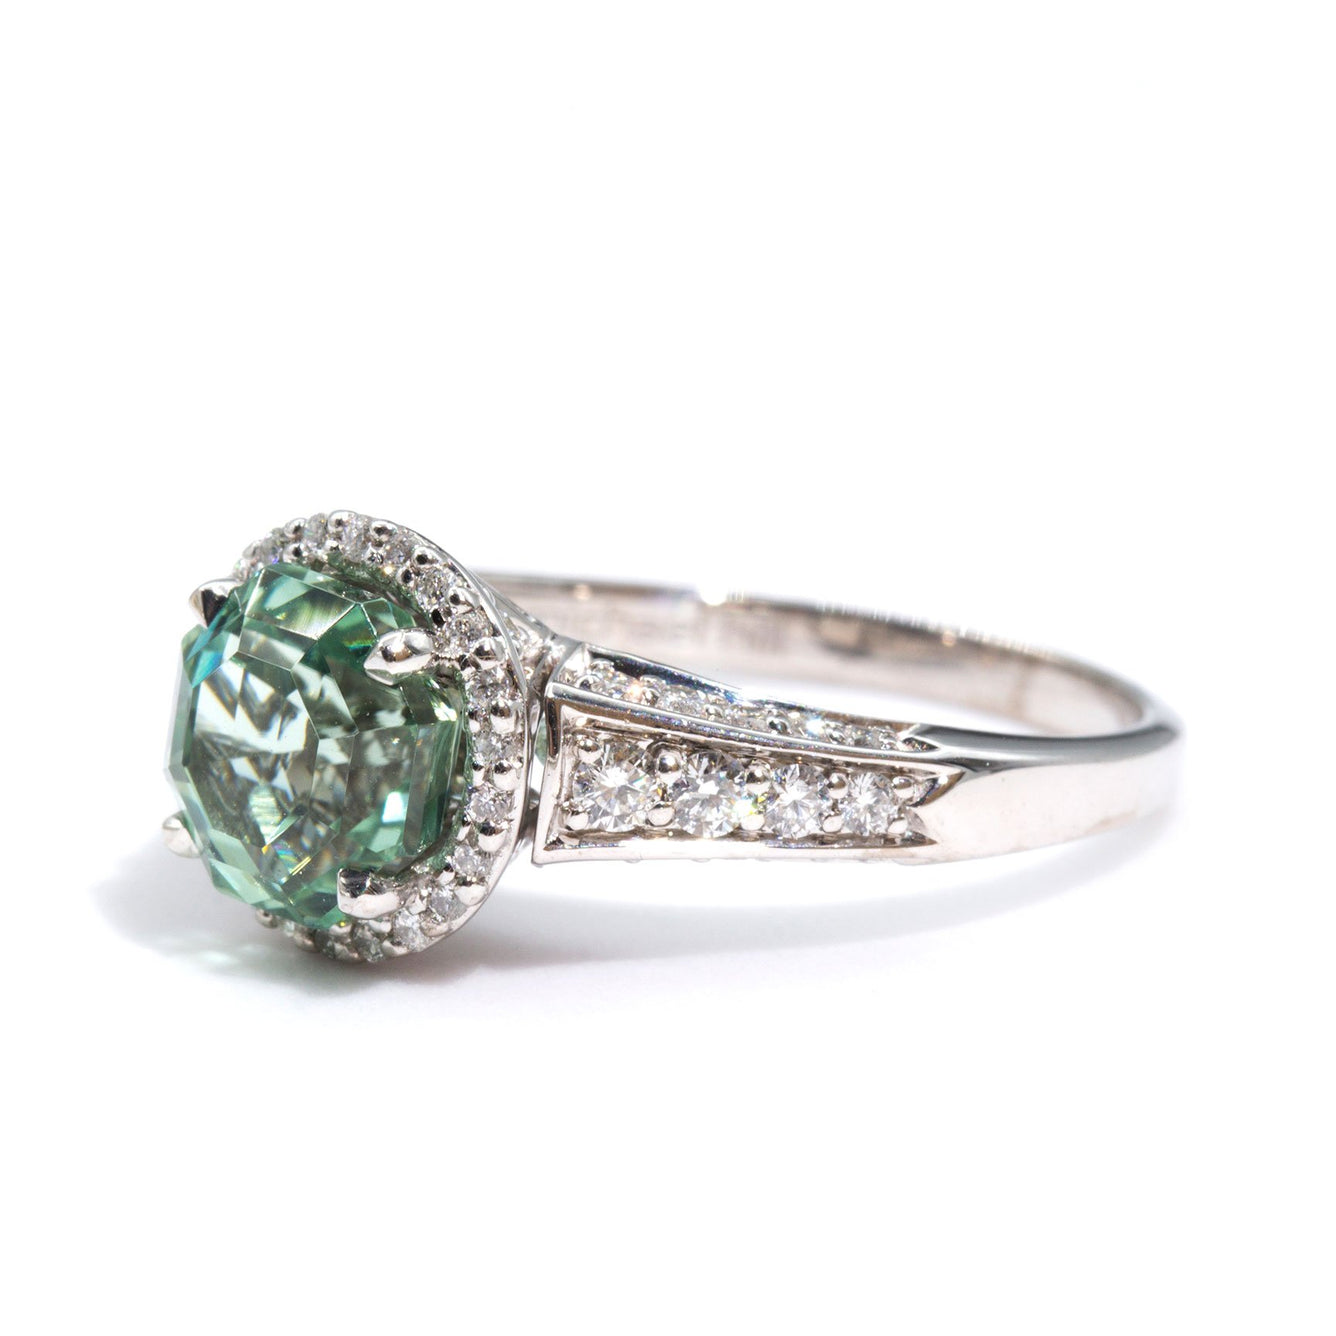 mint-tourmaline-vintage-ring-Ariana-V5-IJ-0421-531 Imperial Jewellery - Auctions, Antique, Vintage & Estate